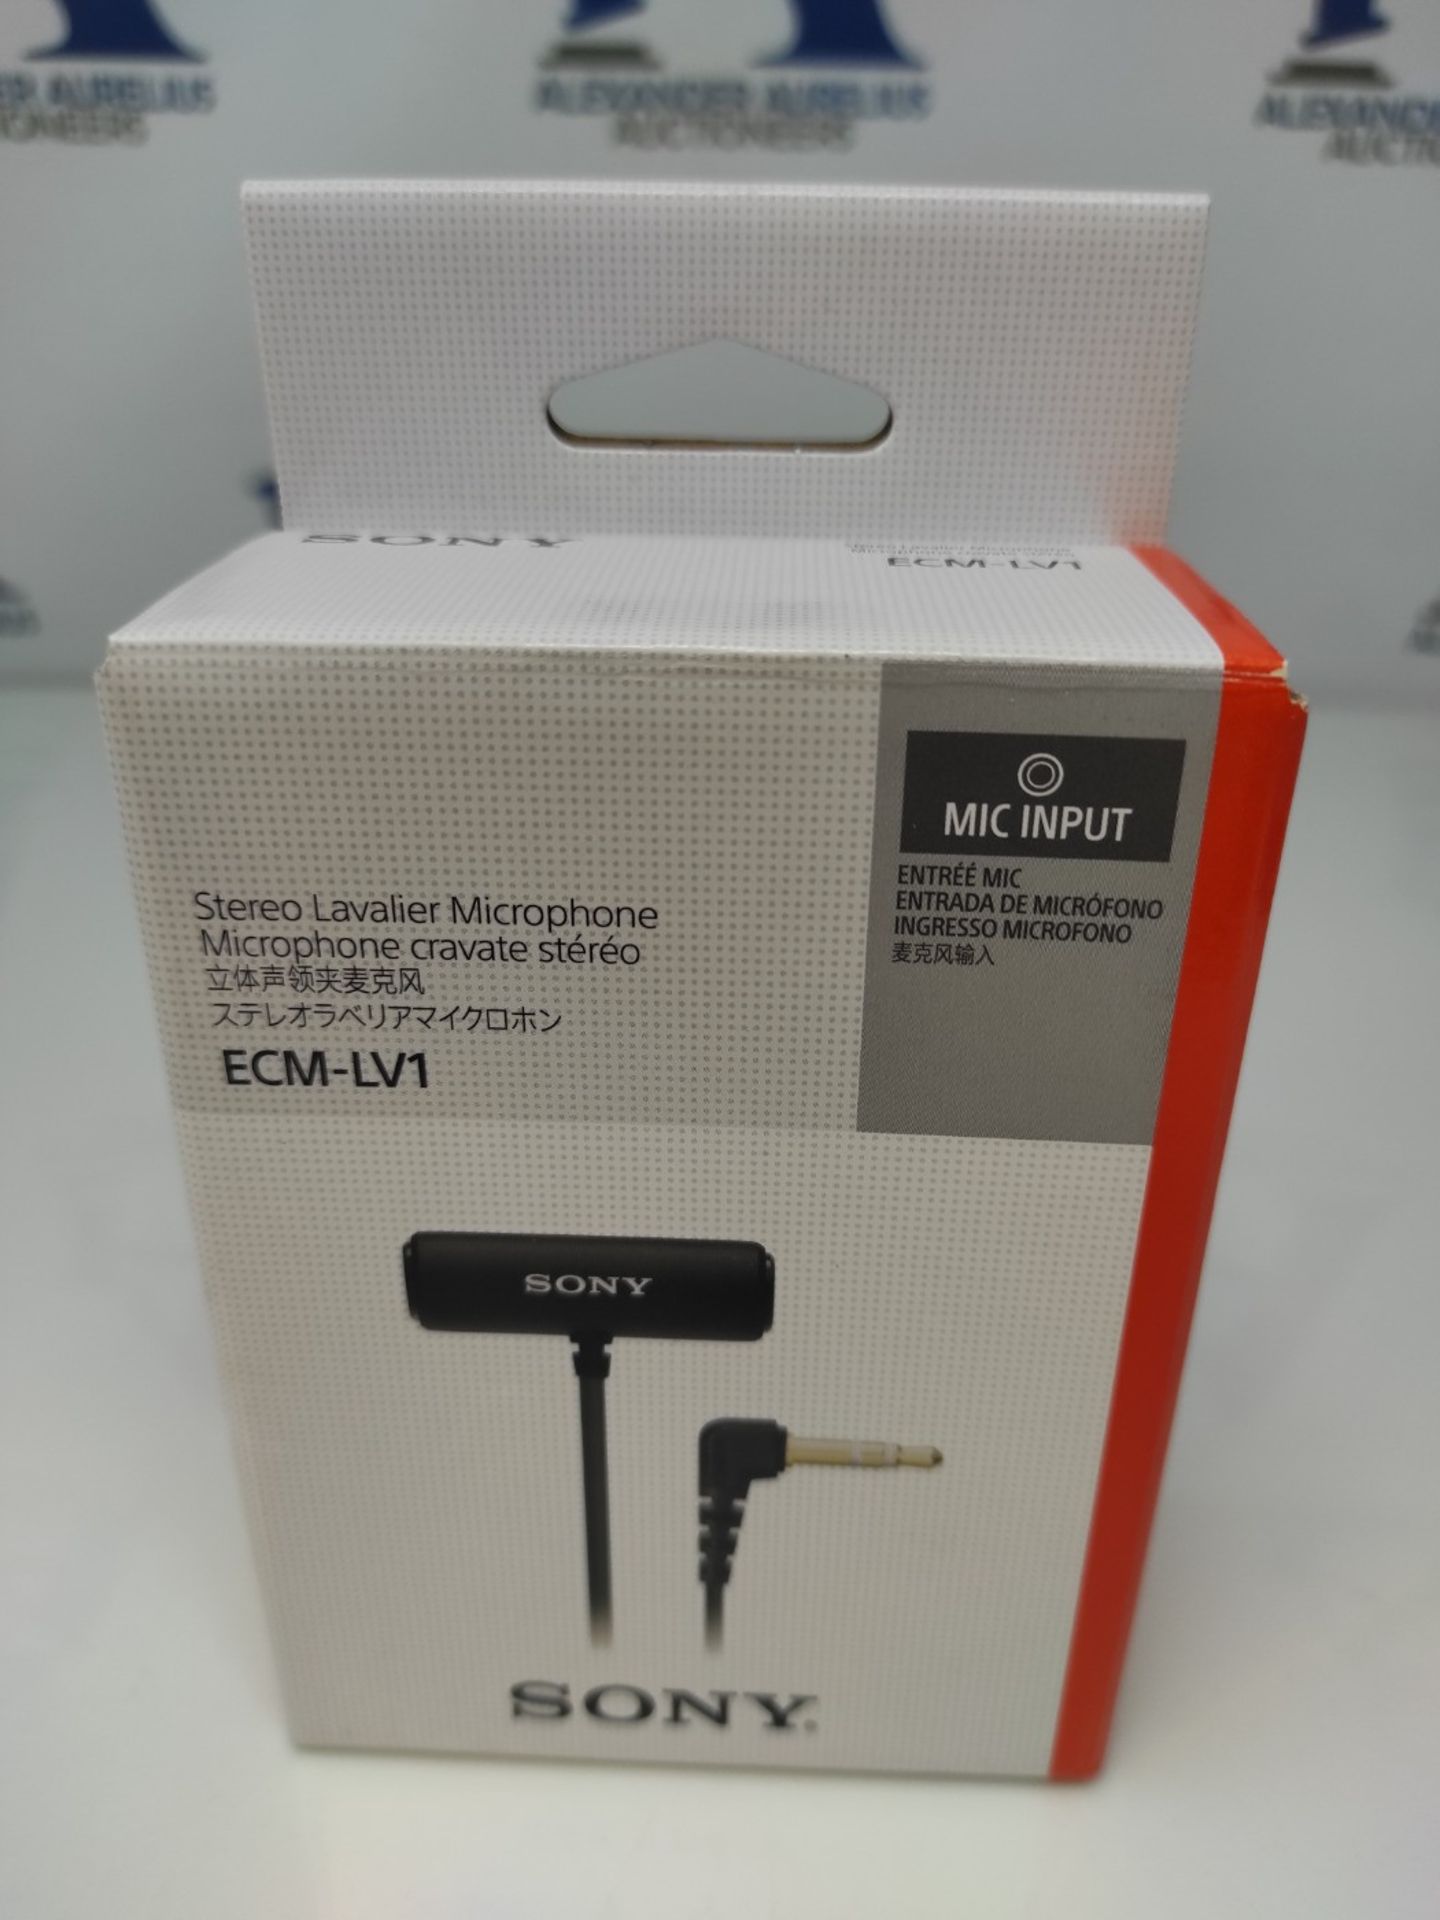 Sony ECM-LV1 - Lavalier Microphone with Stereo Sound Capture, 360° Clothing Clip, for - Image 2 of 3